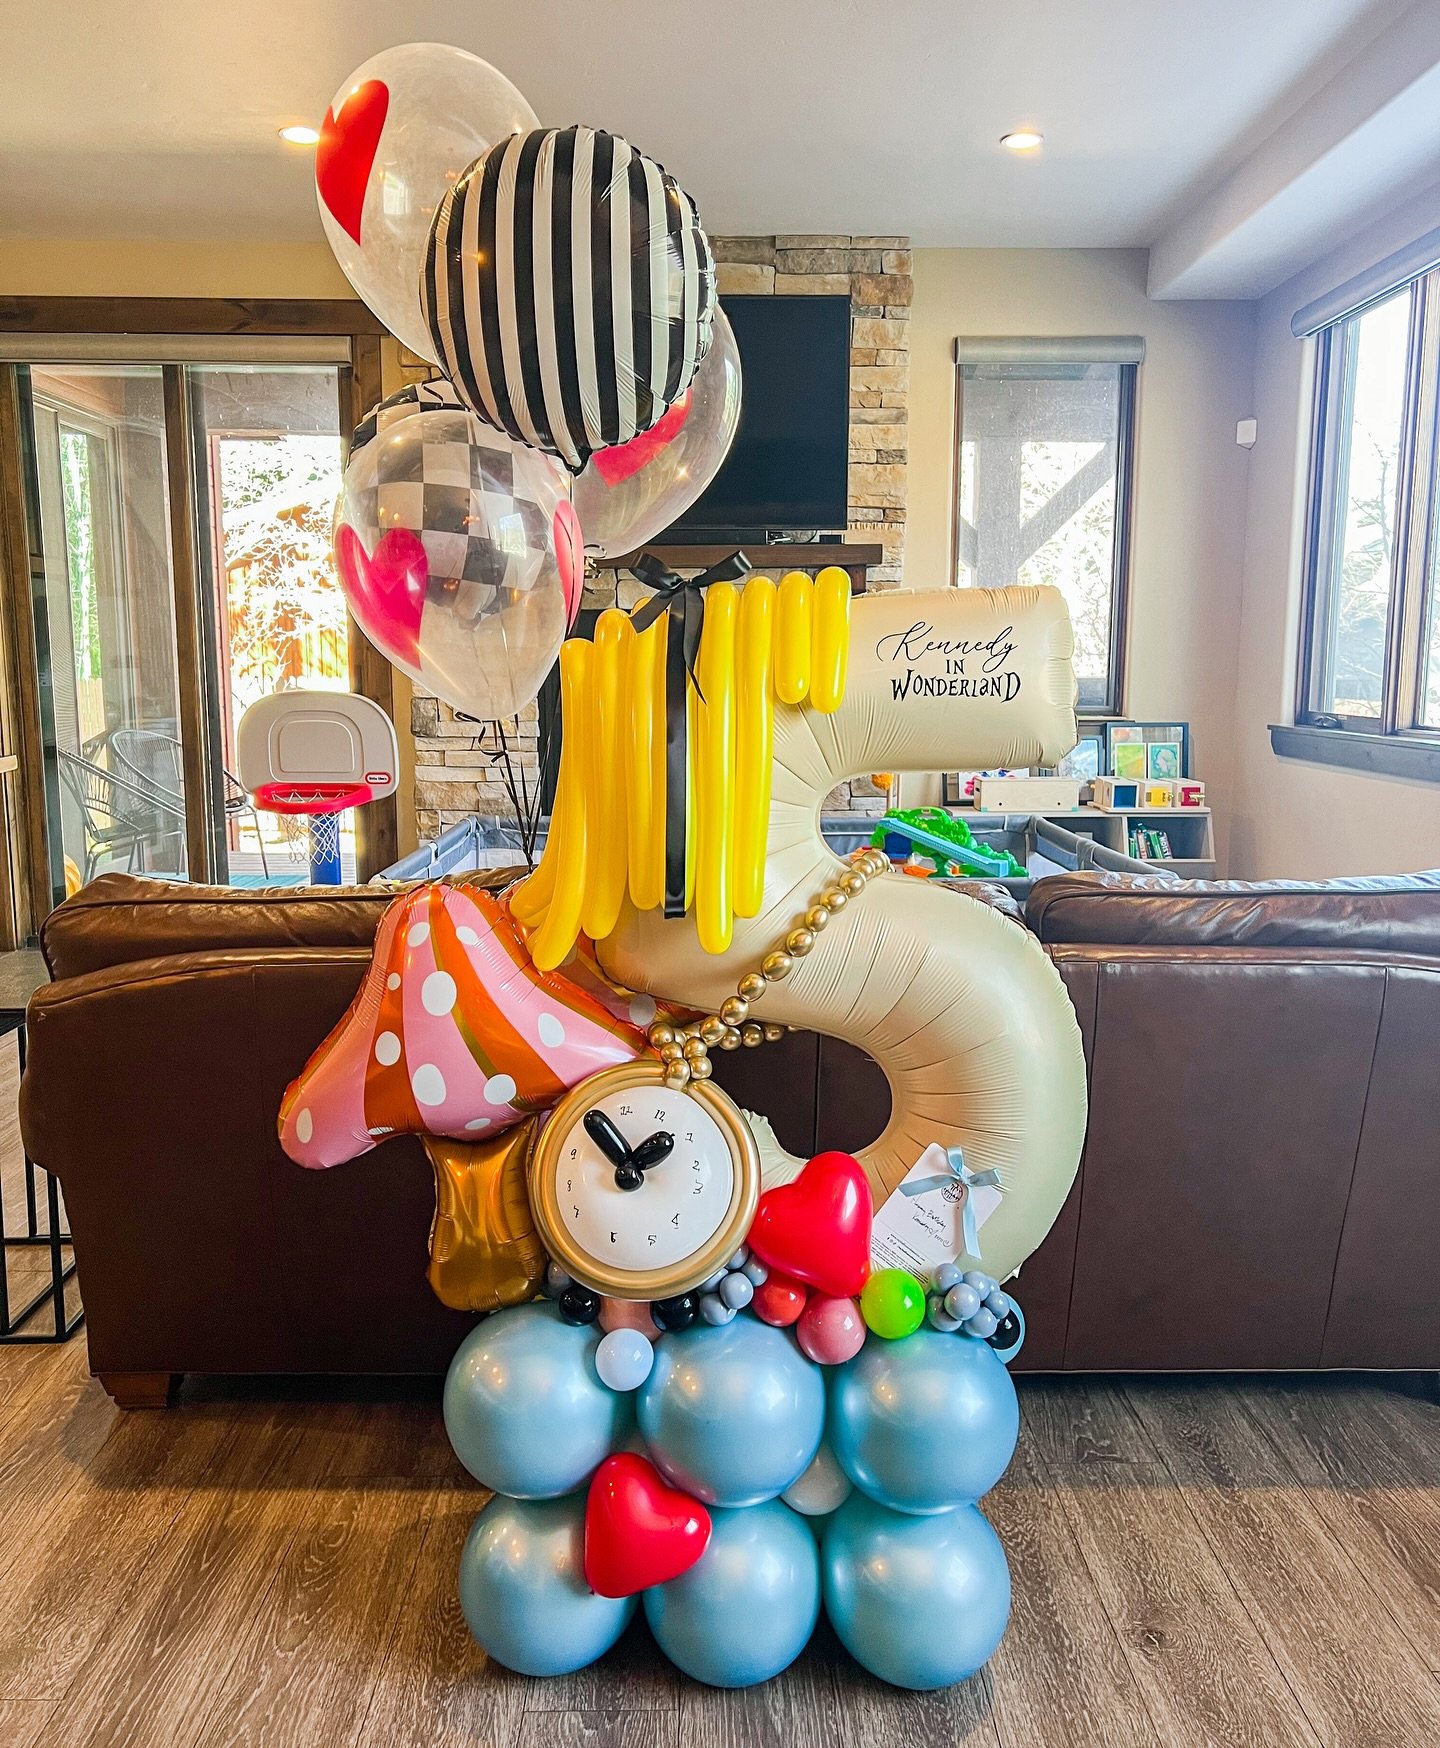 Alice in Wonderland is one of my fav themes! I had to restrain myself from going down the rabbit hole! There were so many ideas floating around in my head. 
.

.
.
. #balloontower #balloon #birthdayballoons #birthday🎂 #balloons #organic balloons #ba